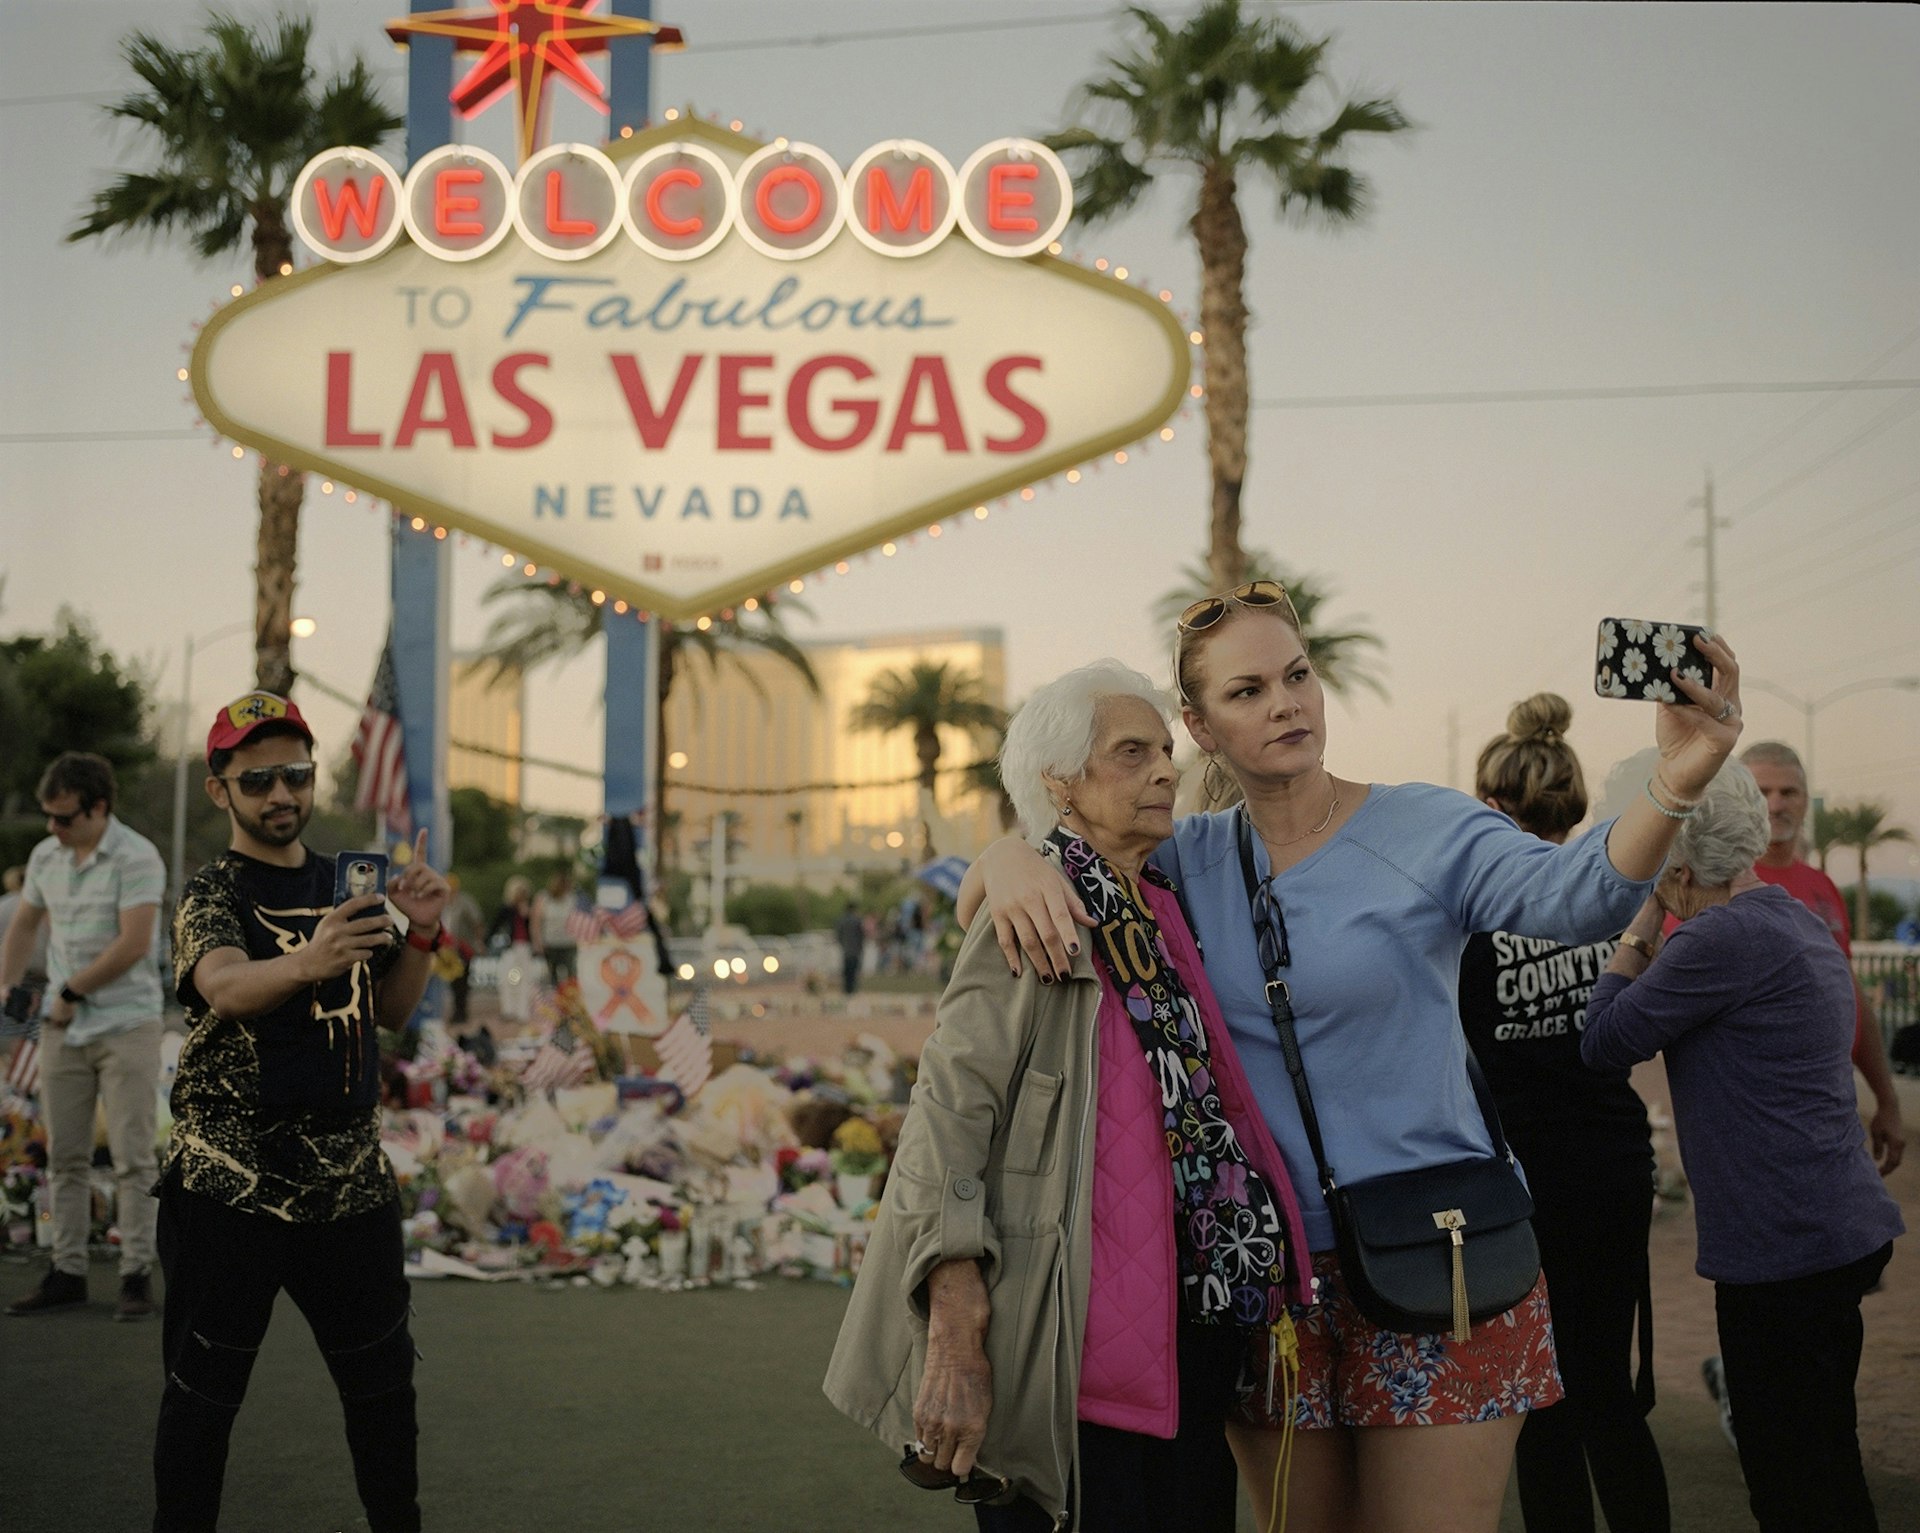 Capturing the eerie aftermath of the Las Vegas shooting